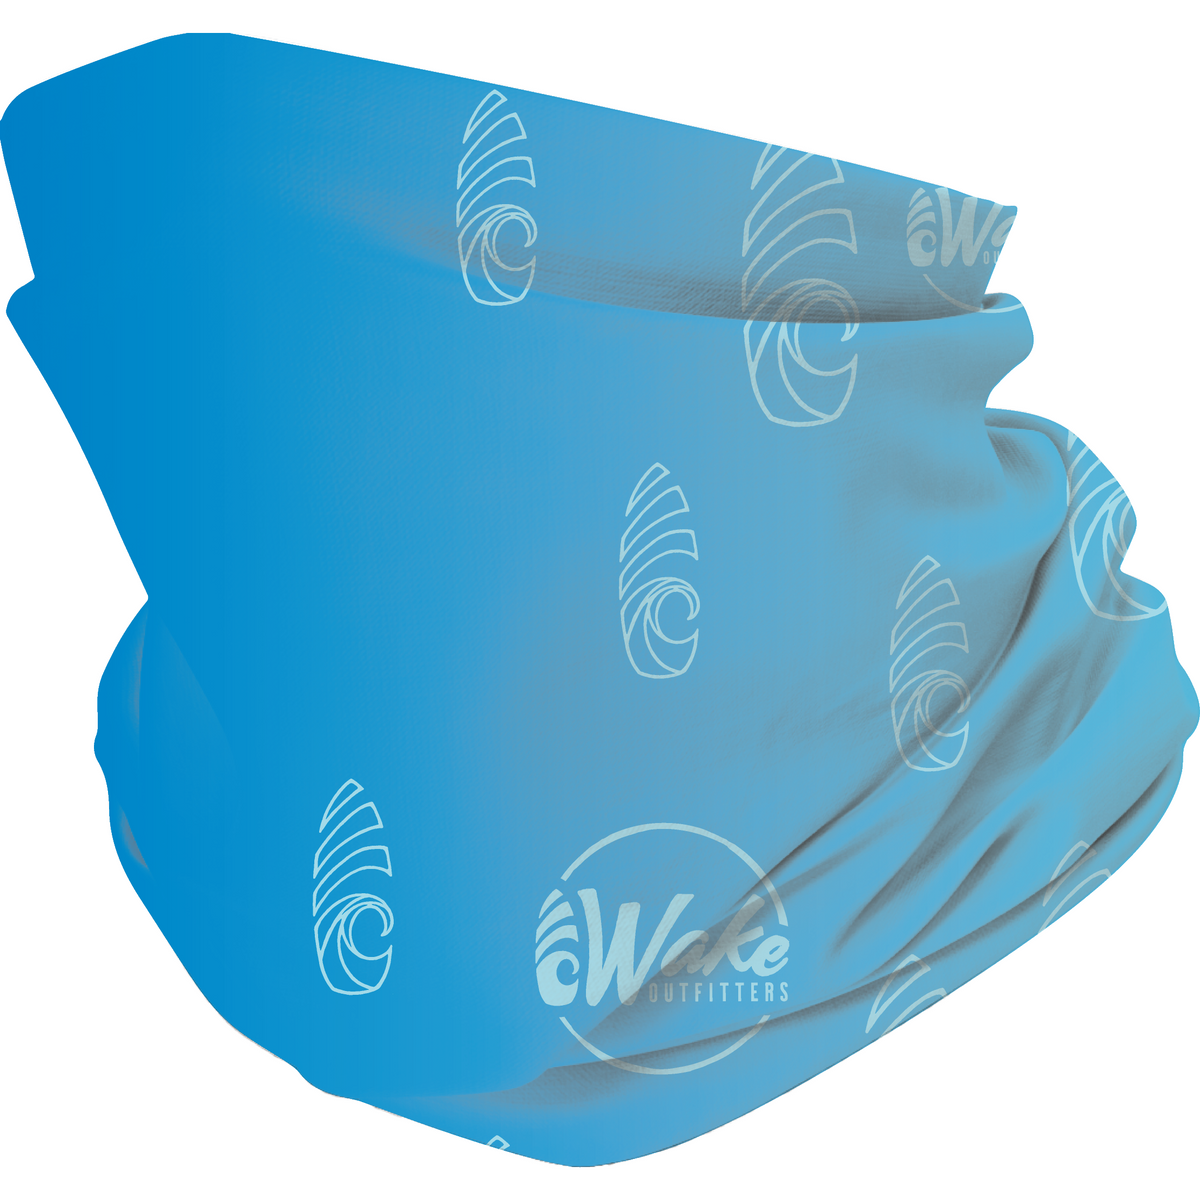 Wake Outfitters Cooling Neck Gaiter